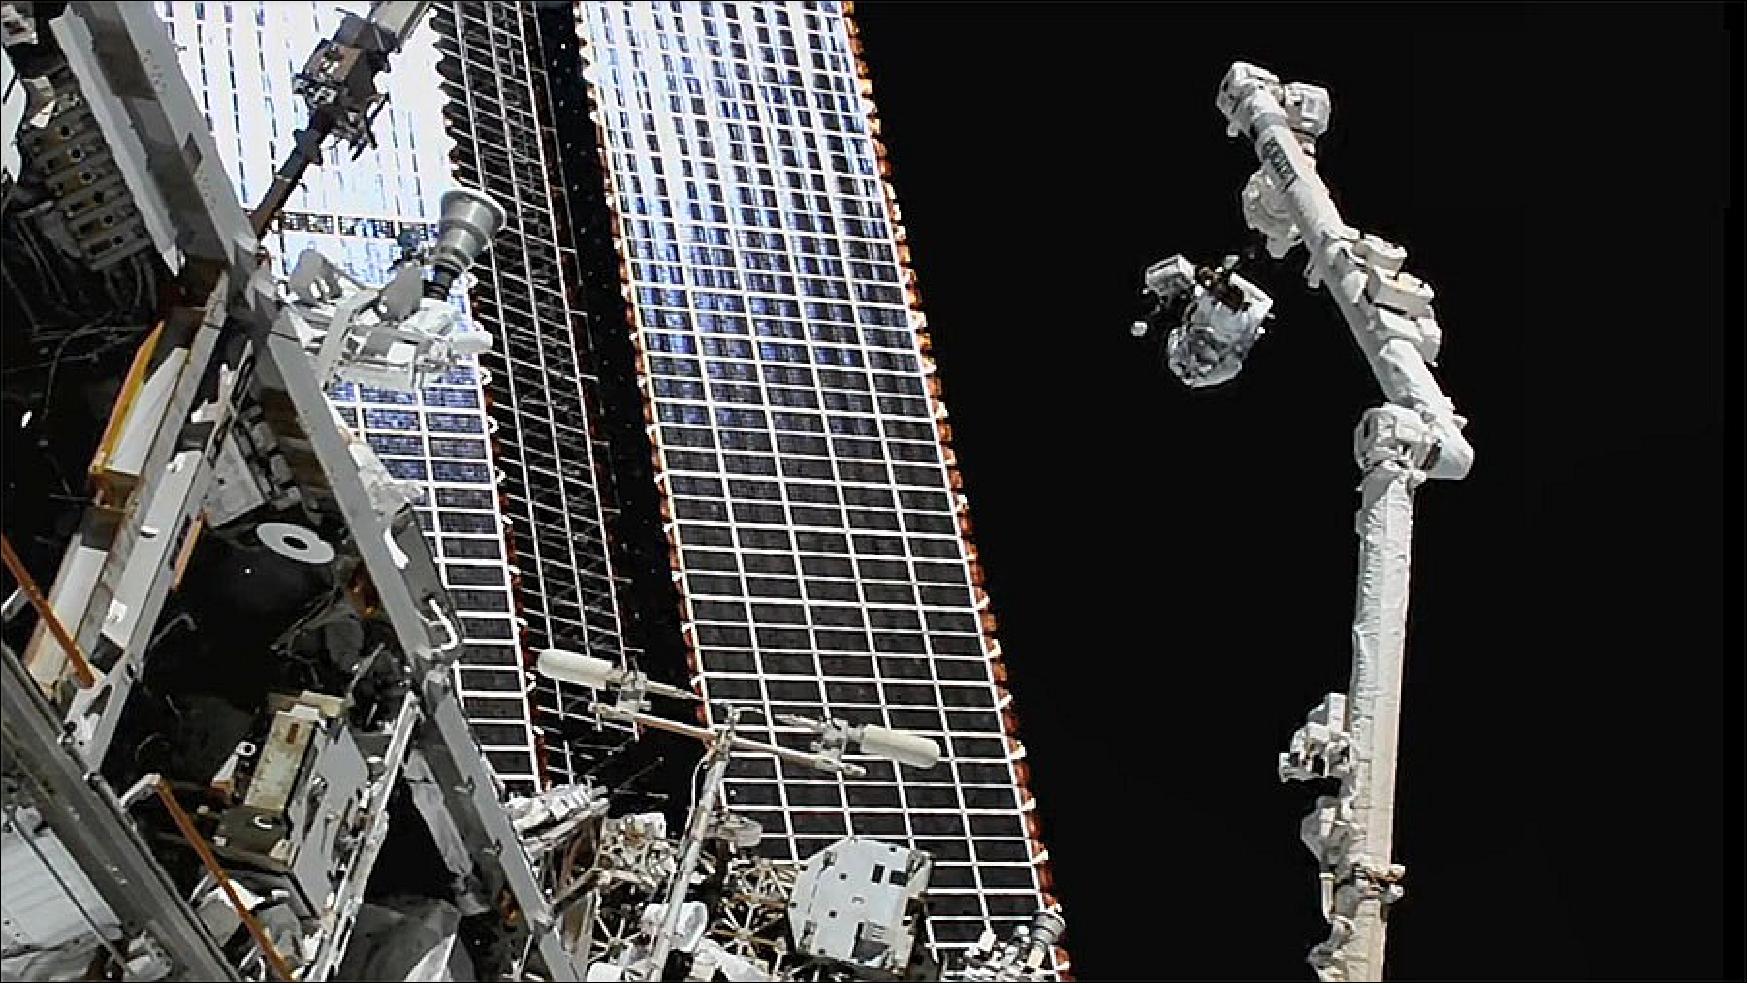 Figure 27: NASA spacewalker Thomas Marshburn (upper right) rides the Canadarm2 robotic arm to the worksite to replace a station antenna system (image credit: NASA TV)